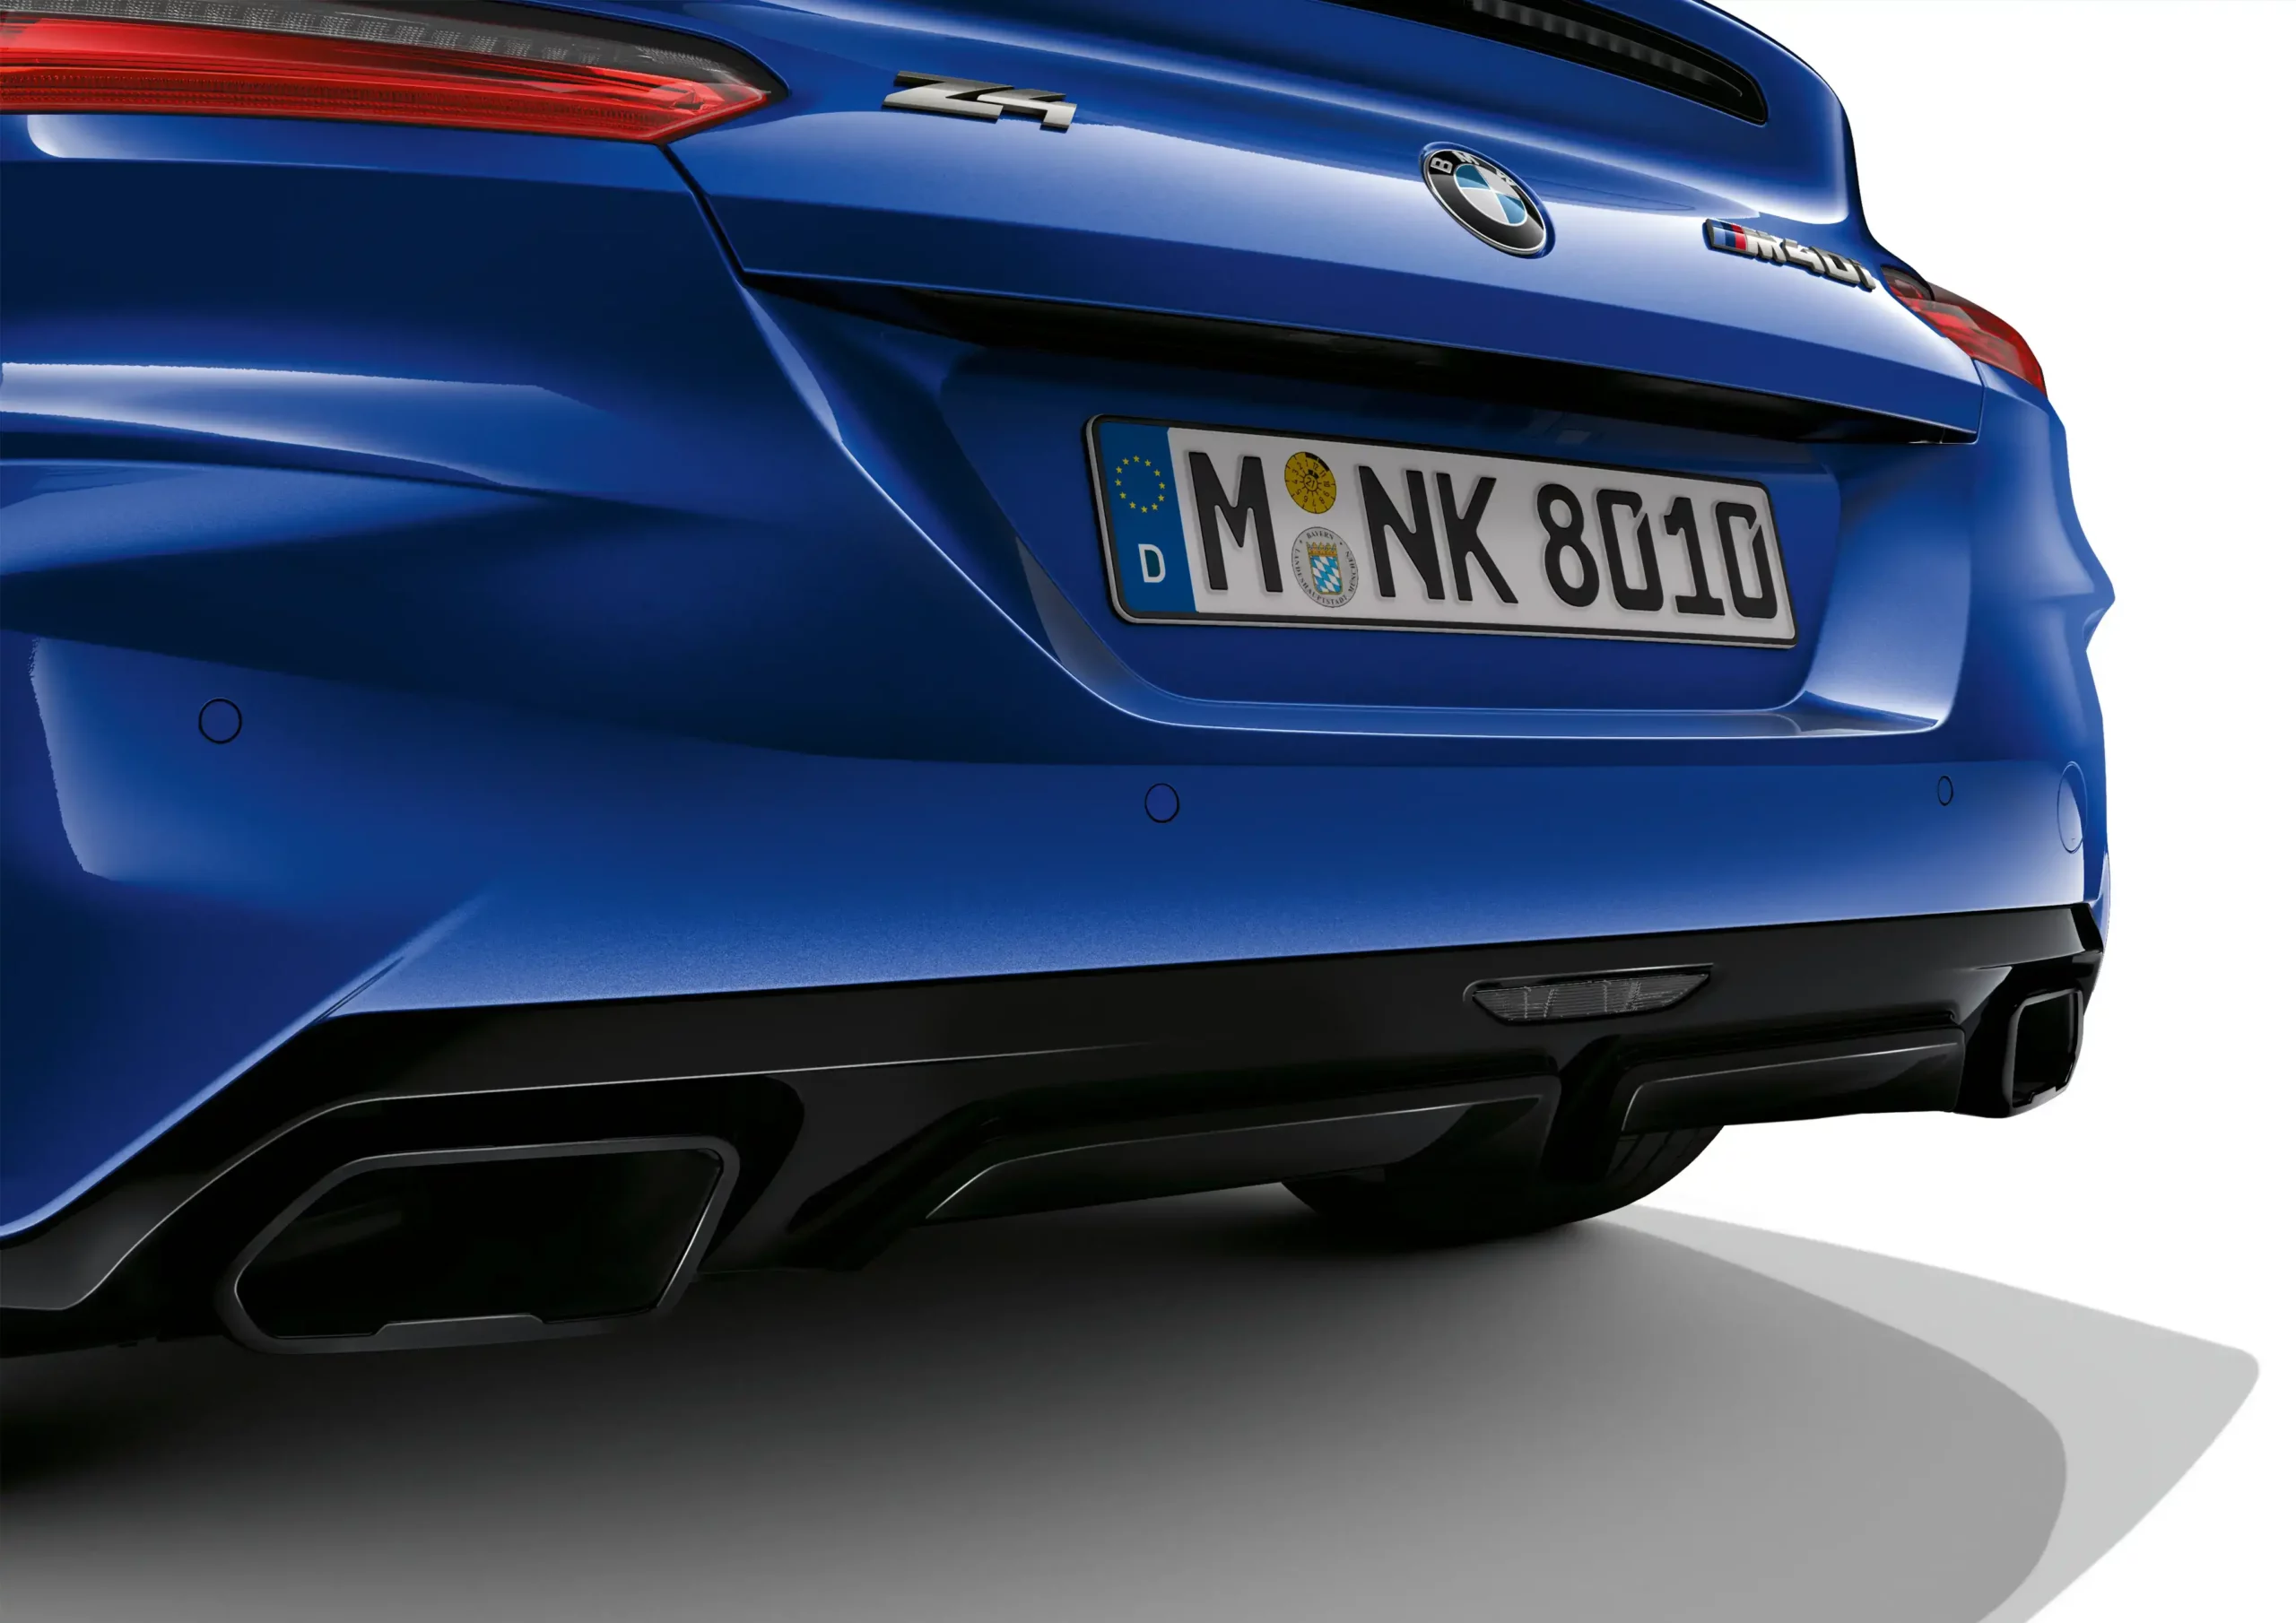 Exhaust tailpipes in free-form.